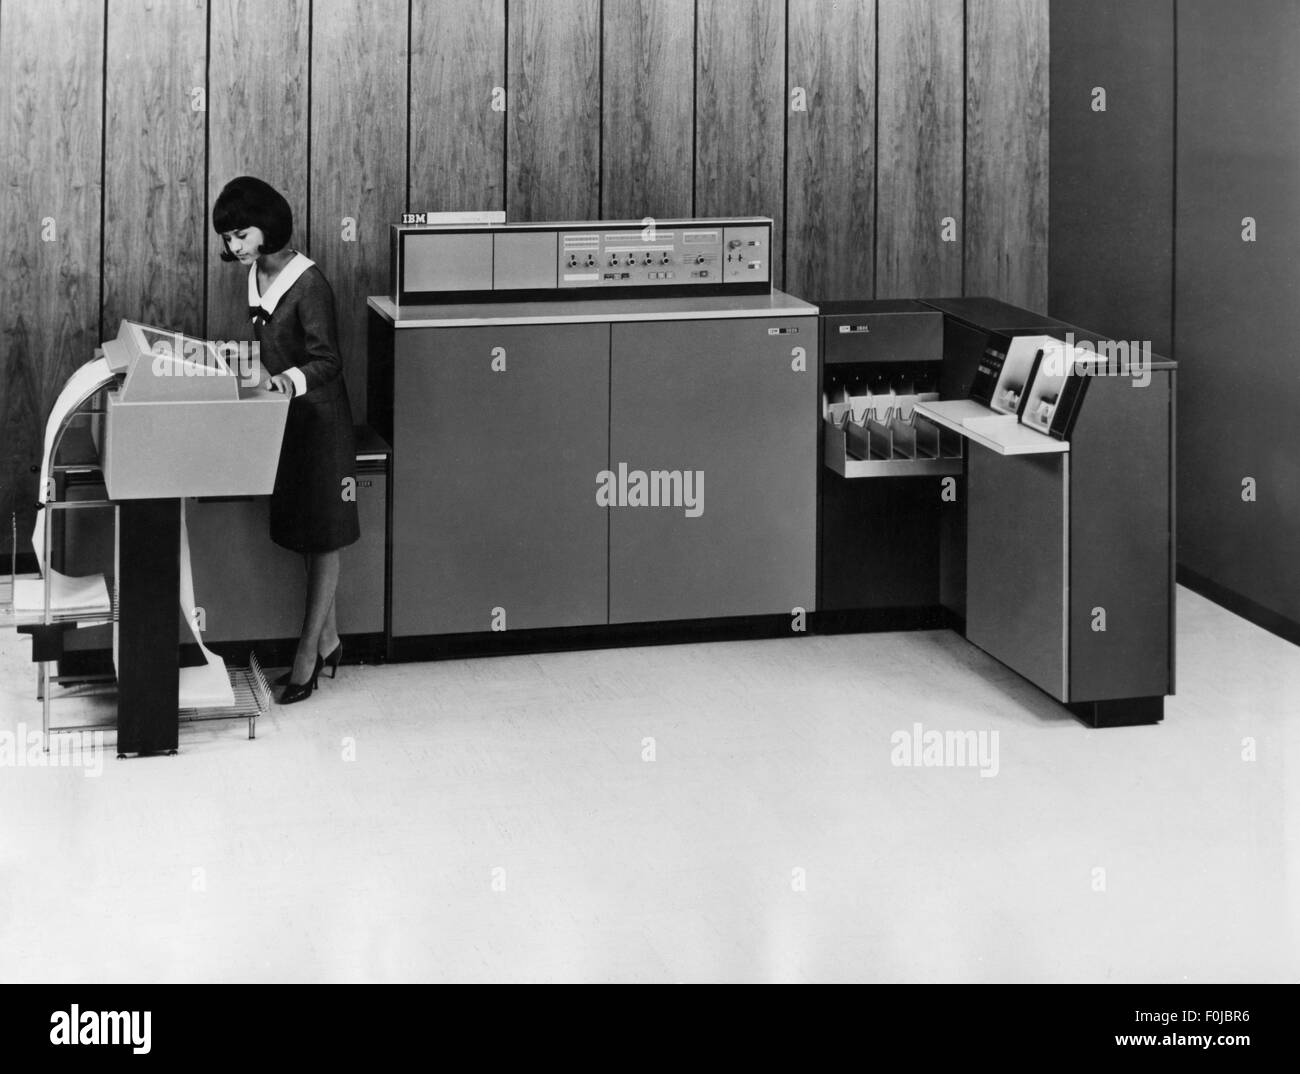 technics, computer, IBM System/360 Model 20 data processing unit, 1964, 20th century, EDP, IT, printer IBM 2203, central processing unit IBM 2020, card unit IBM 2560, punchcard, punchcards, punch card, punch cards, half length, standing, works, working, work, electronic data processing, information technology, Chief Information Officer, technics, technology, technologies, 1960s, 60s, computer, computers, historic, historical, woman, women, female, people, Additional-Rights-Clearences-Not Available Stock Photo